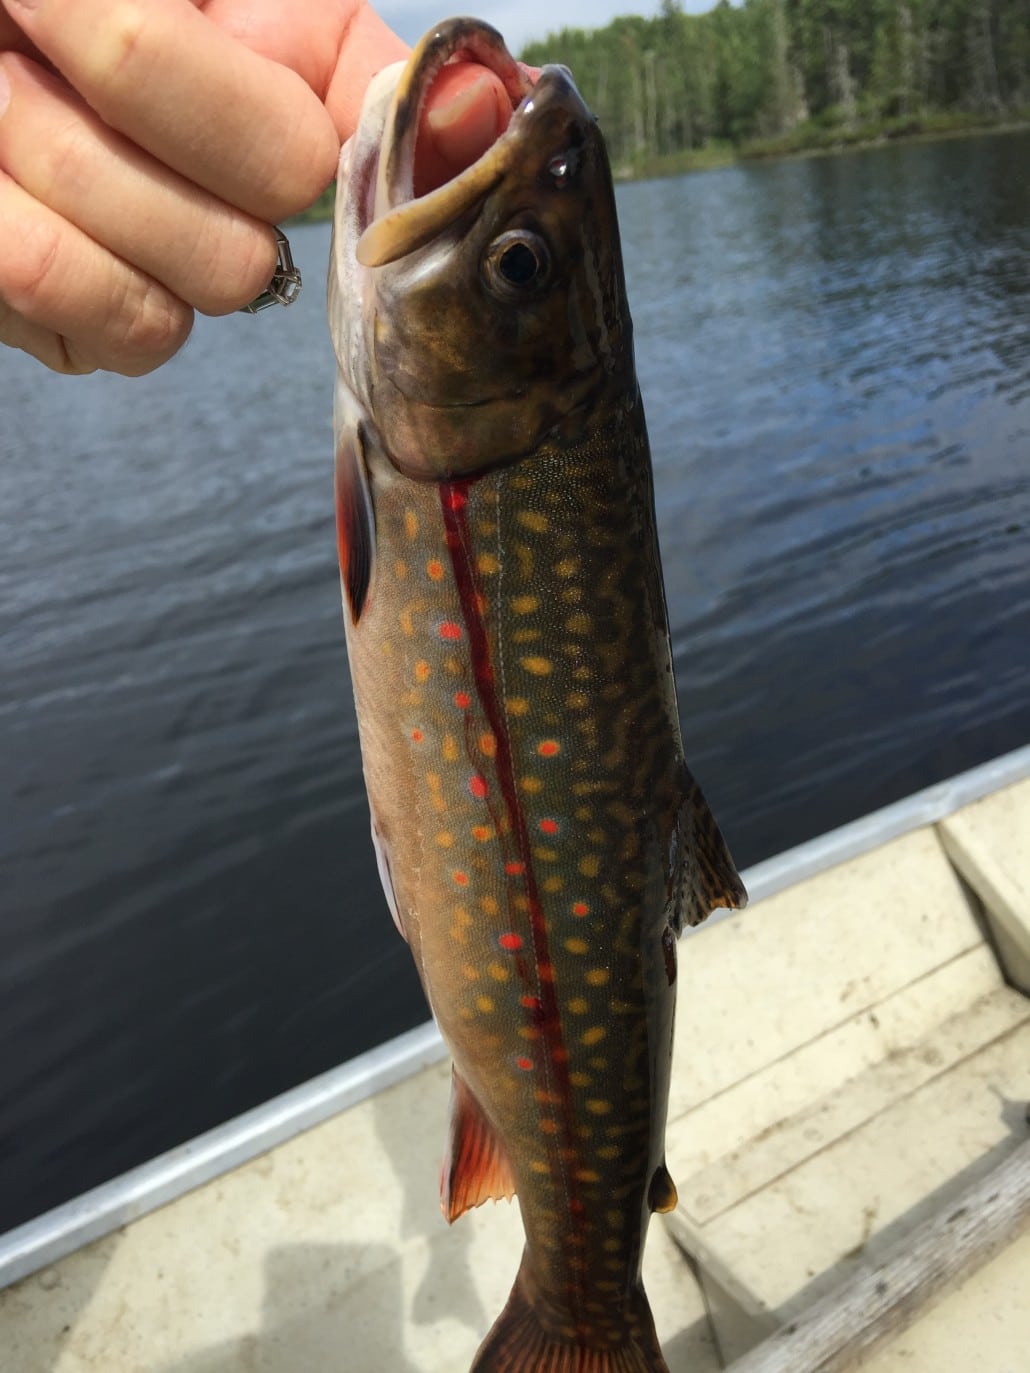 Trout caught on lake at Mekoos